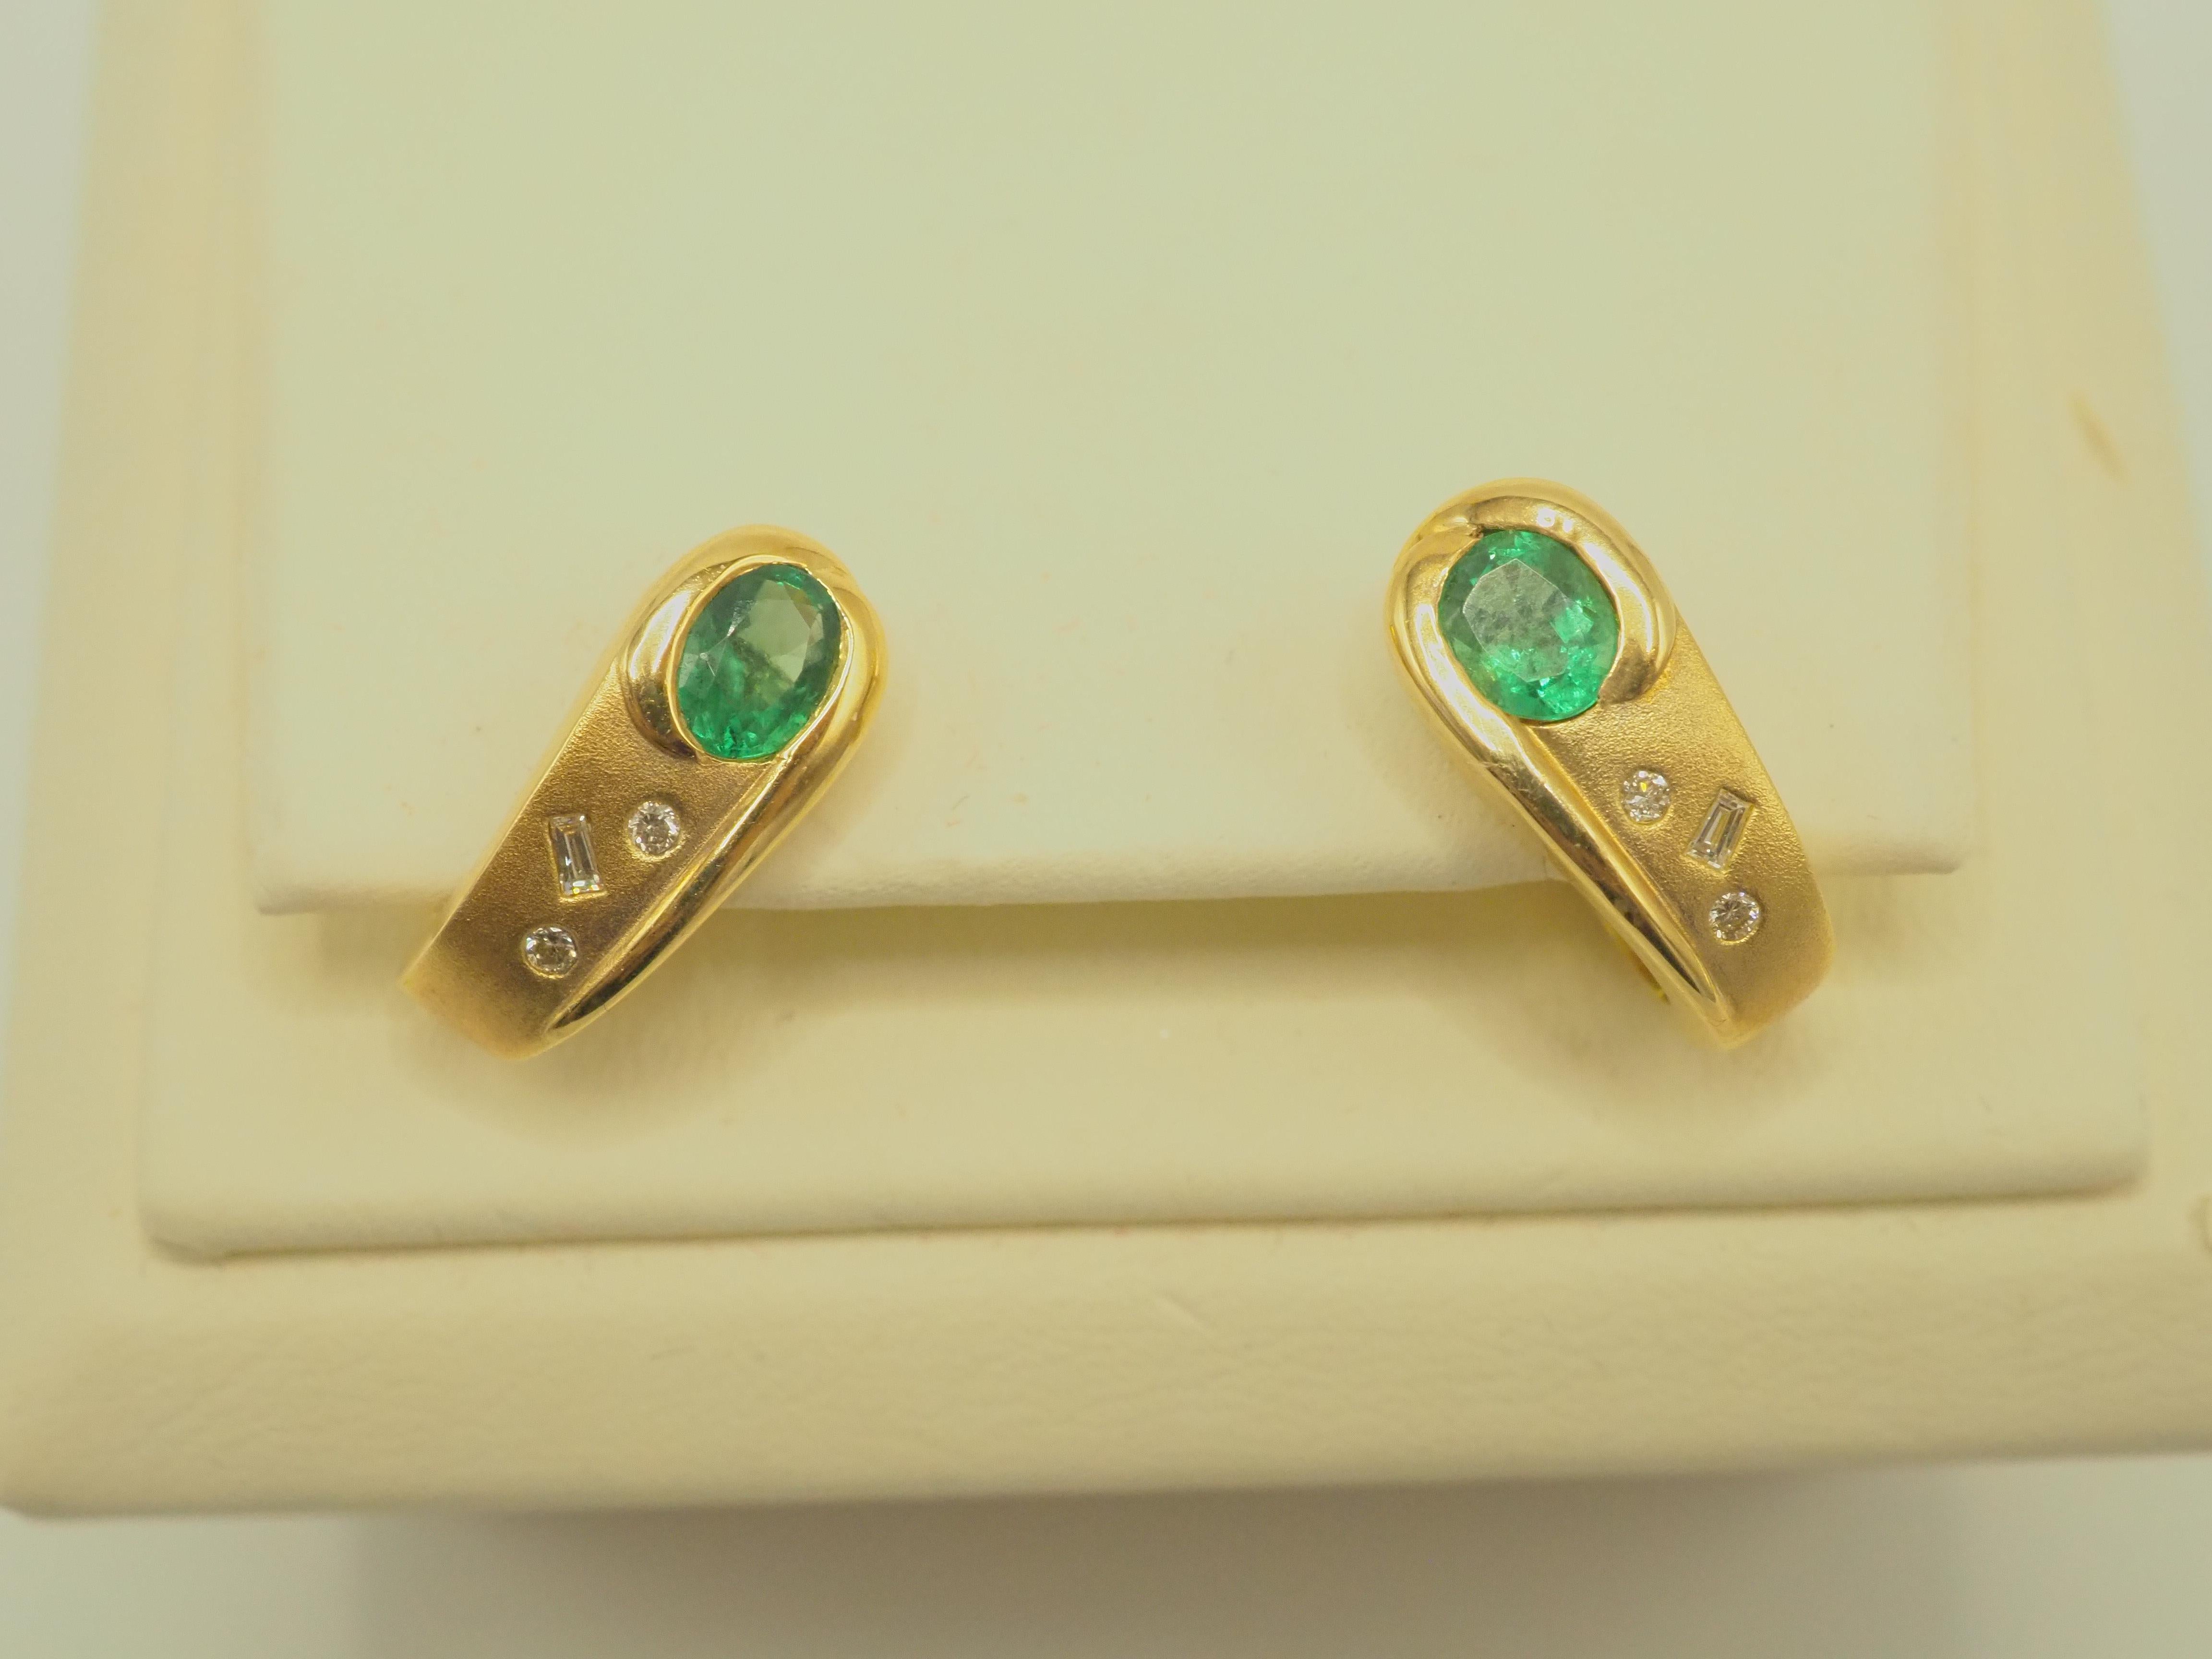 This piece is a fine and gorgeous oval vibrant green emerald and diamond unique earring. The oval emeralds have very nice bright green tone and saturation with good clarity. The six baguette and round diamonds are genuine with good color and